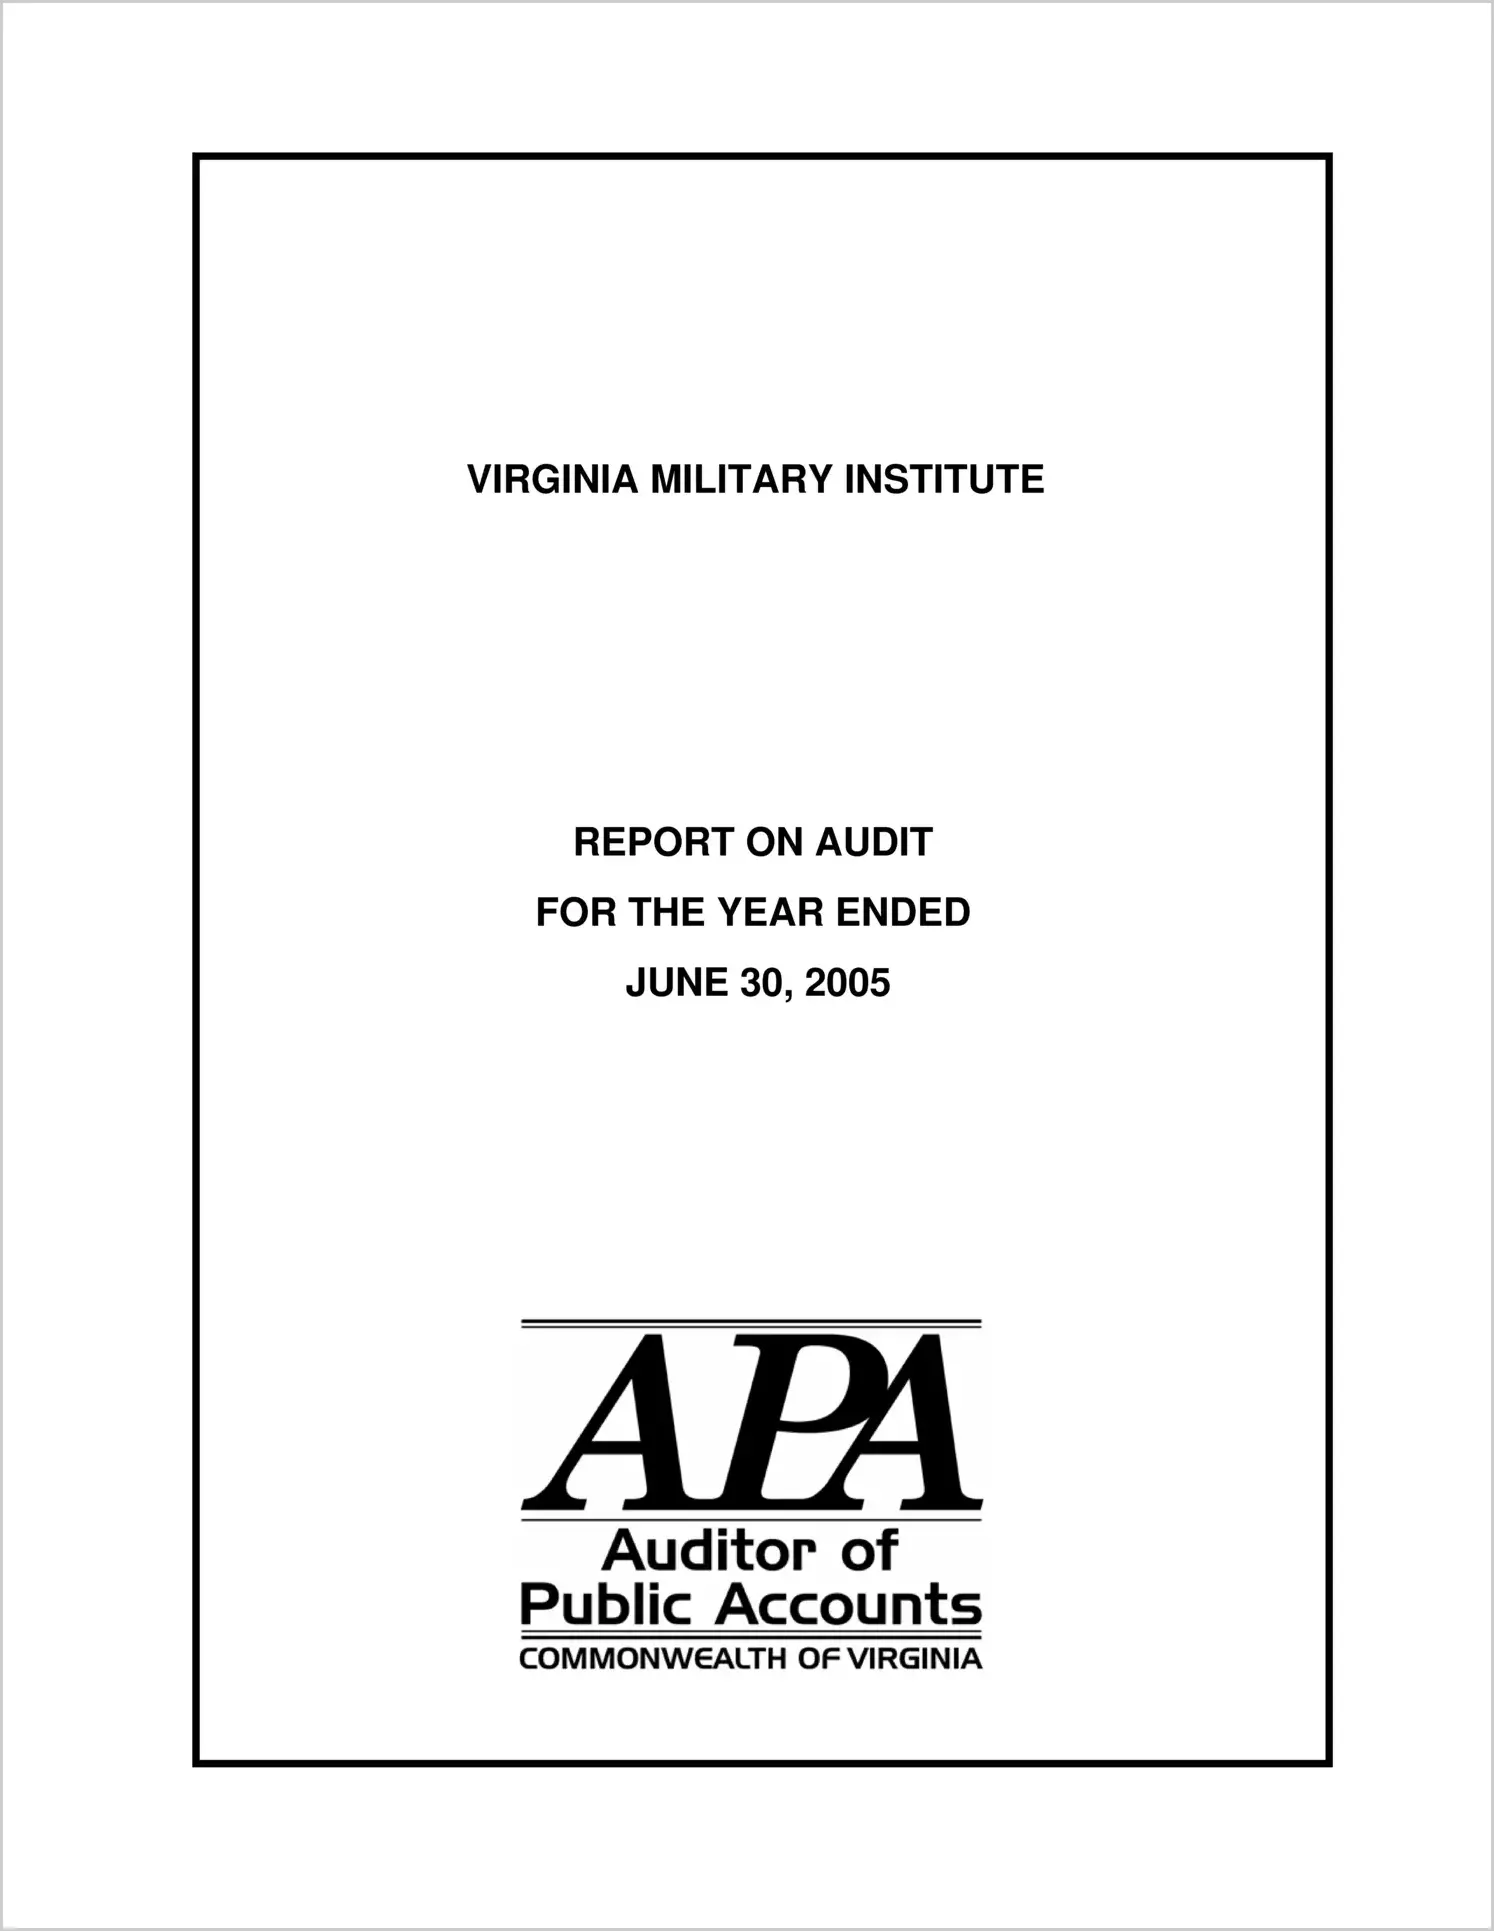 Virginia Military Institute for the year ended June 30, 2005